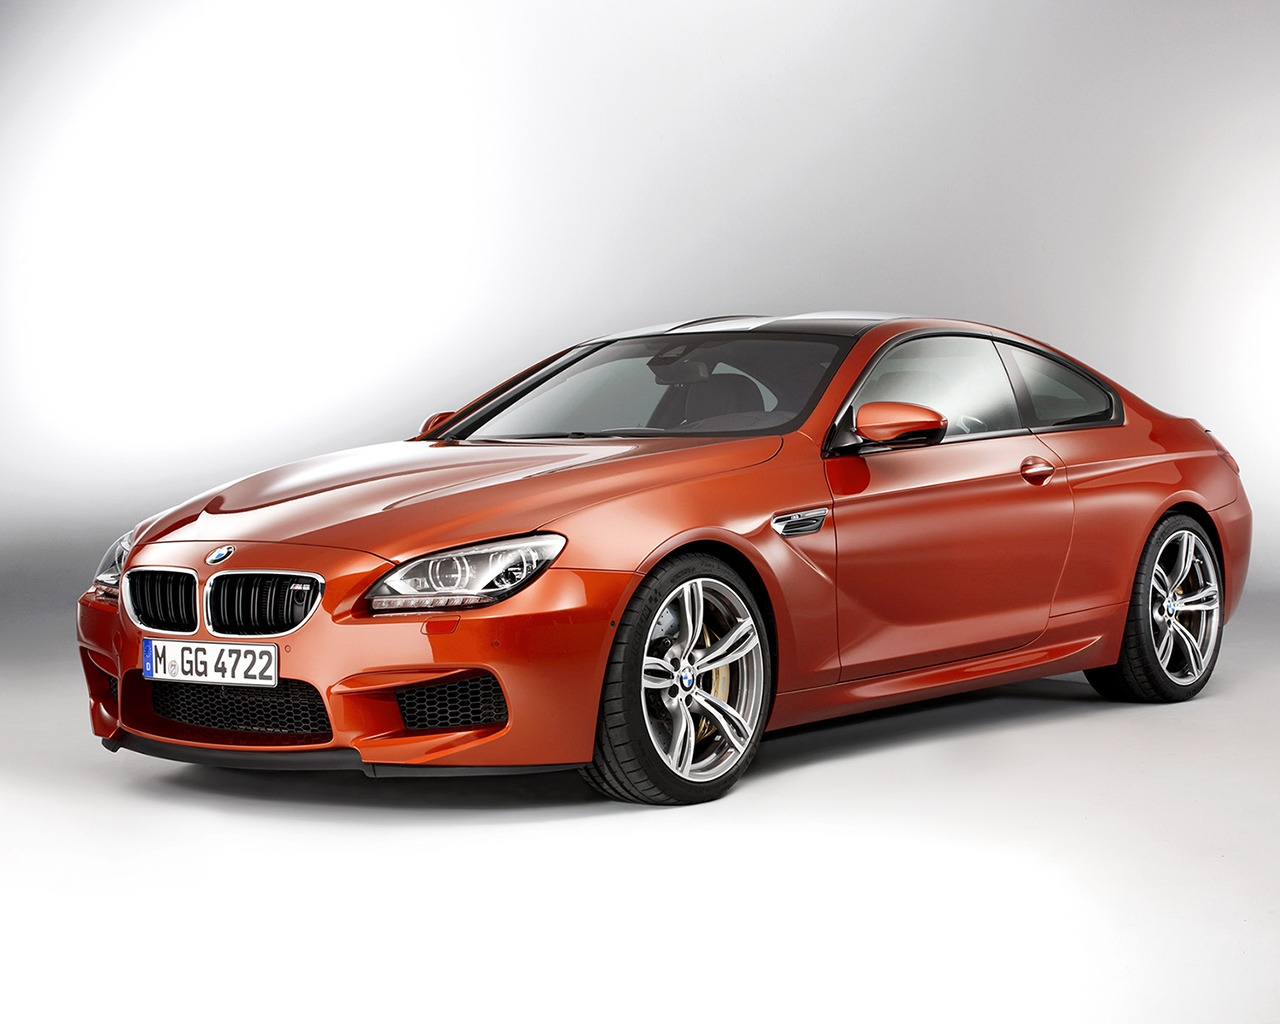 2013 BMW M6 Coupe Studio for 1280 x 1024 resolution